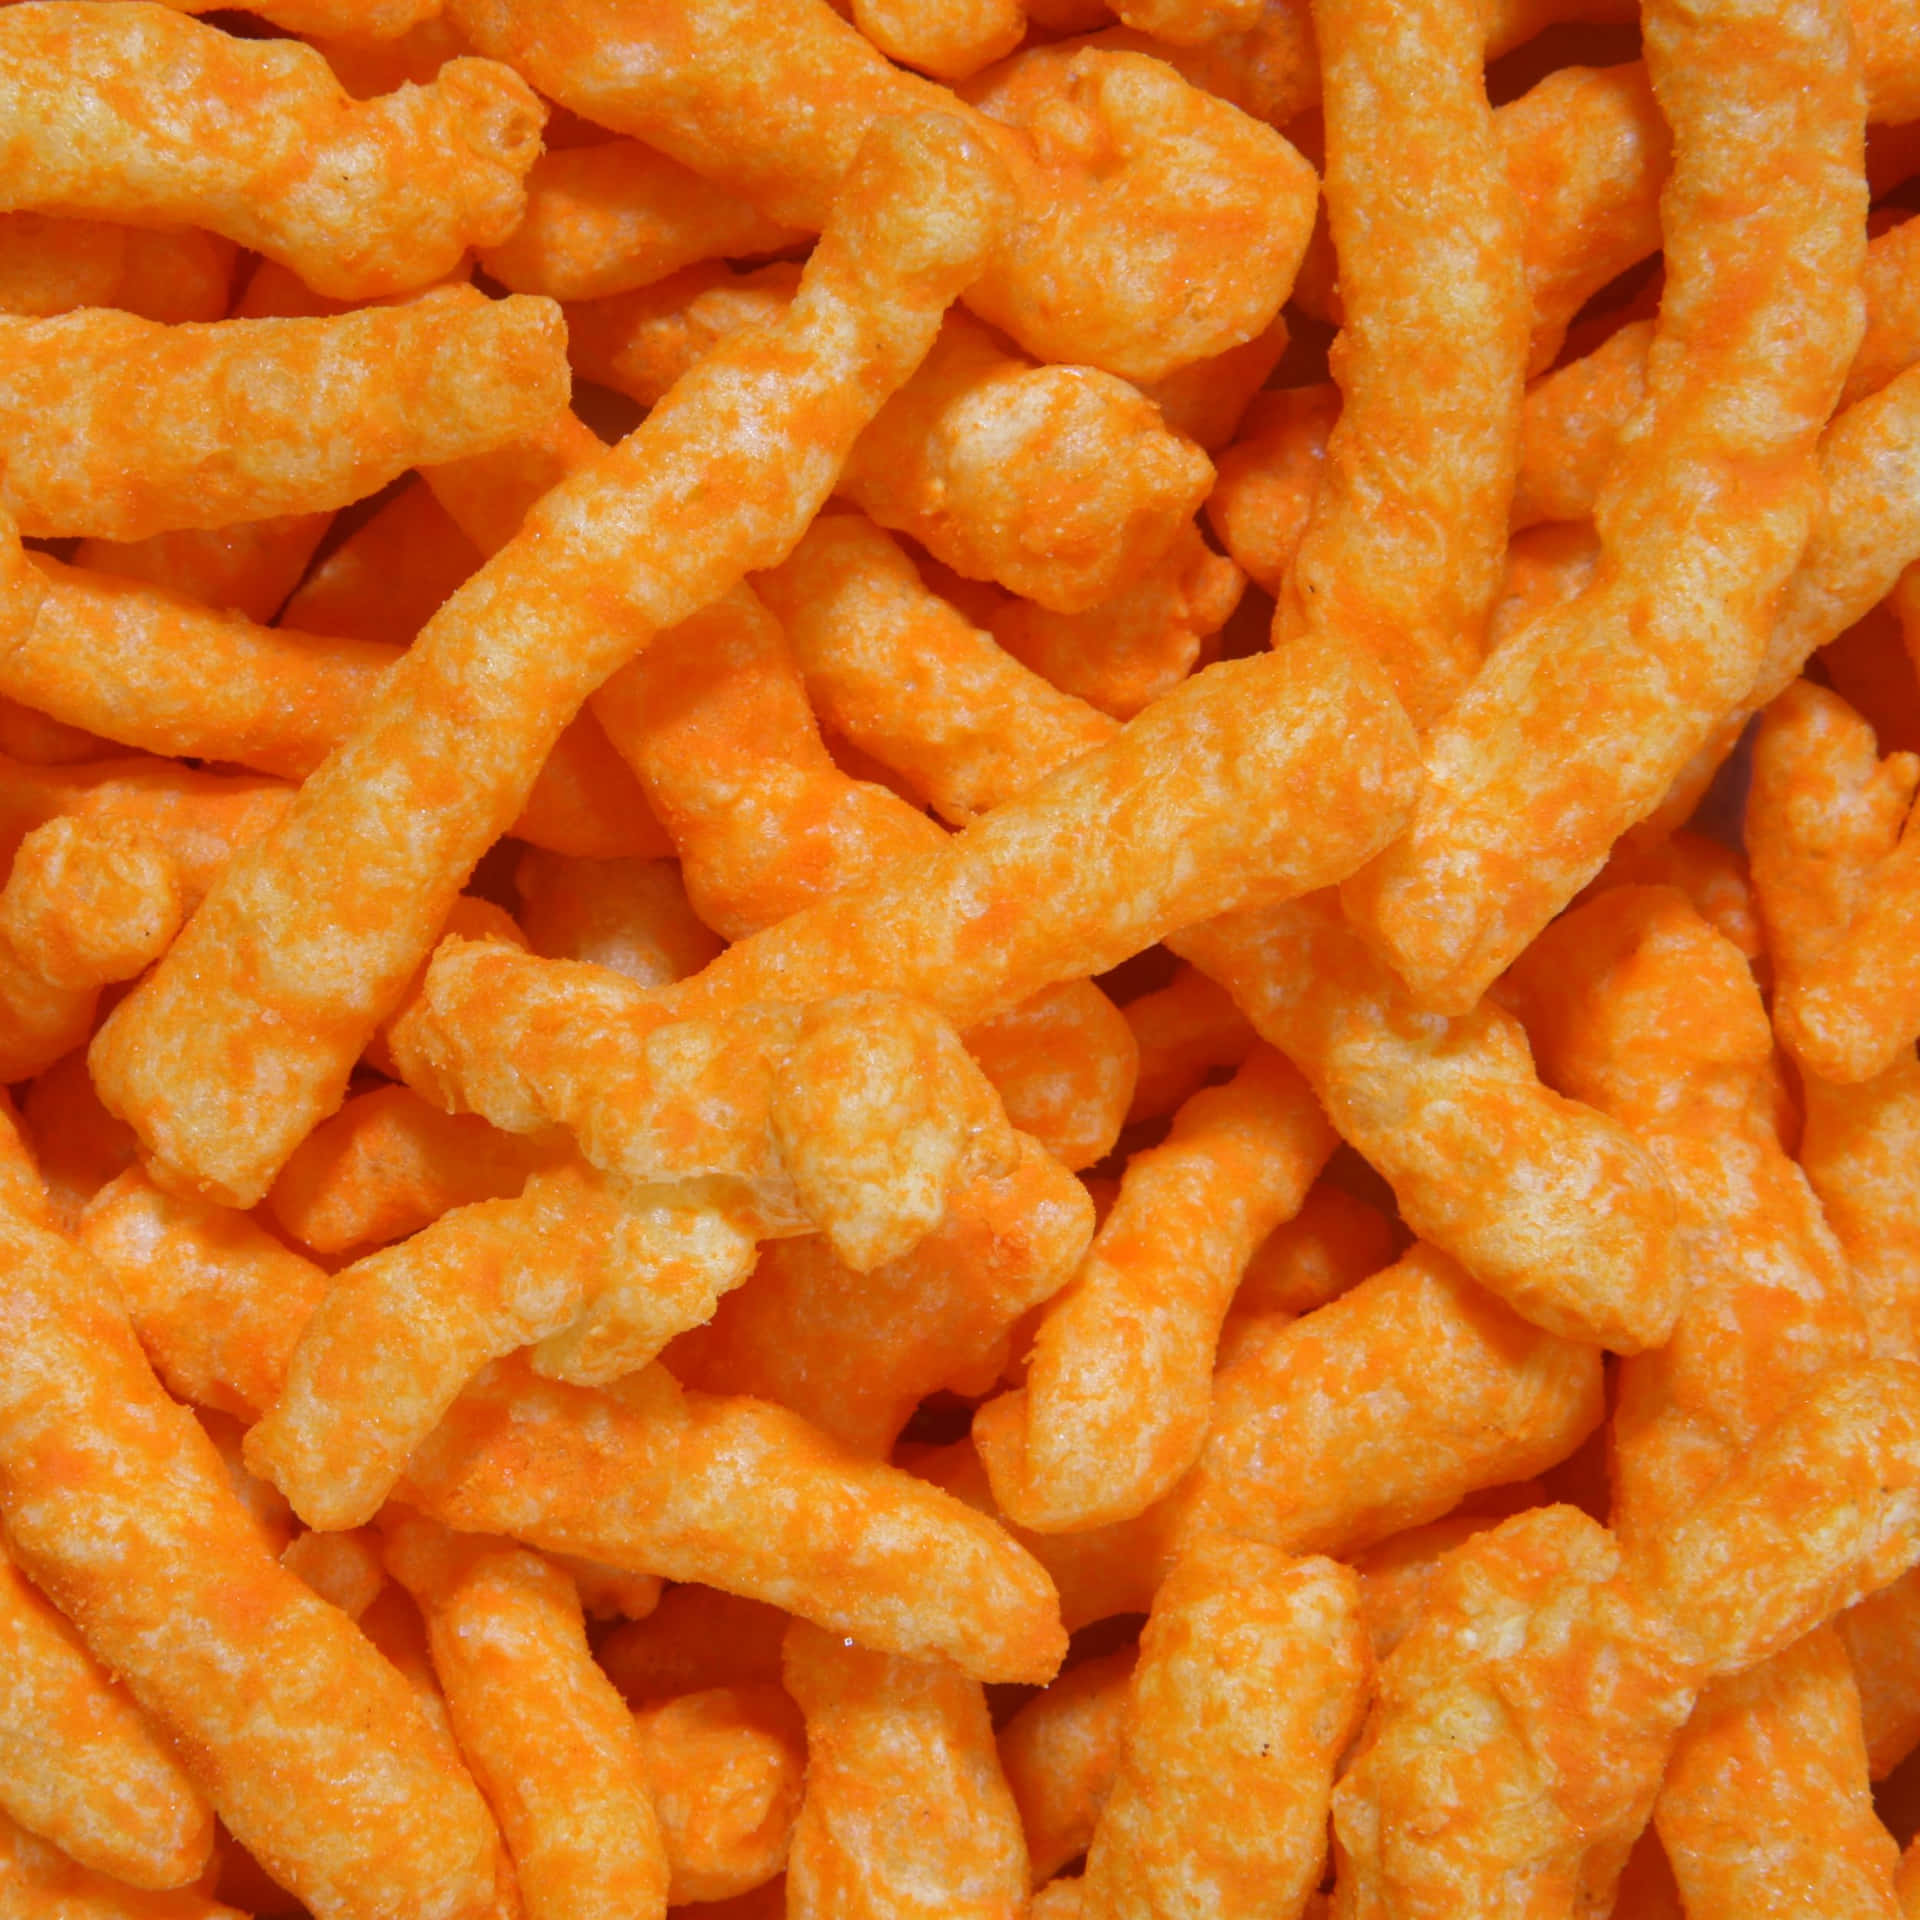 Spice up your life with Hot Cheetos! Wallpaper